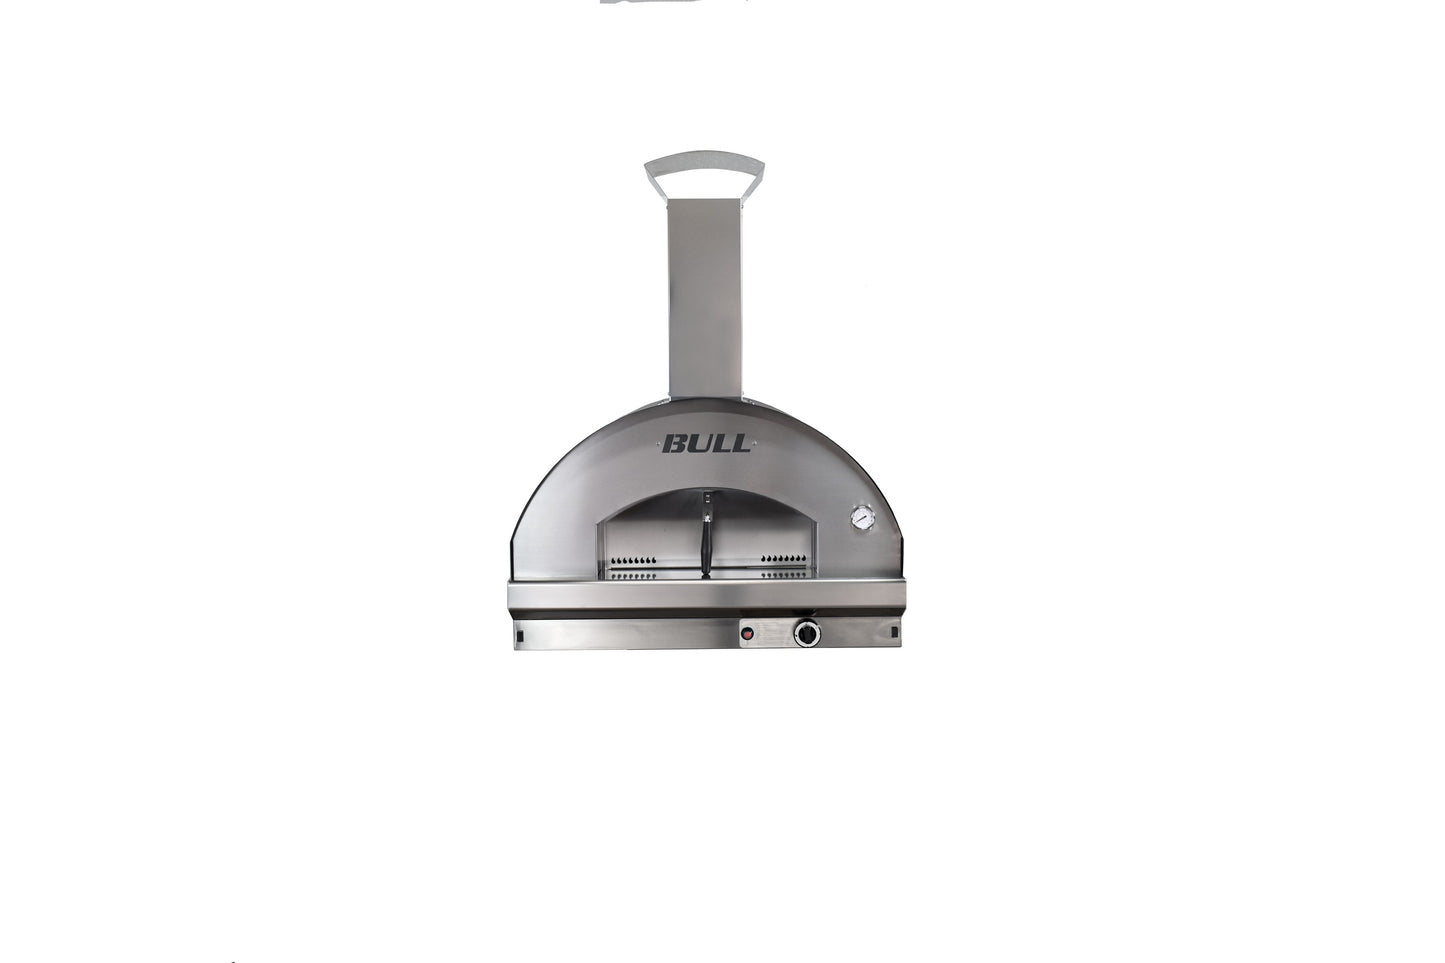 BULL GAS FUELLED Extra Large Pizza Oven 80x60cm (no cart)